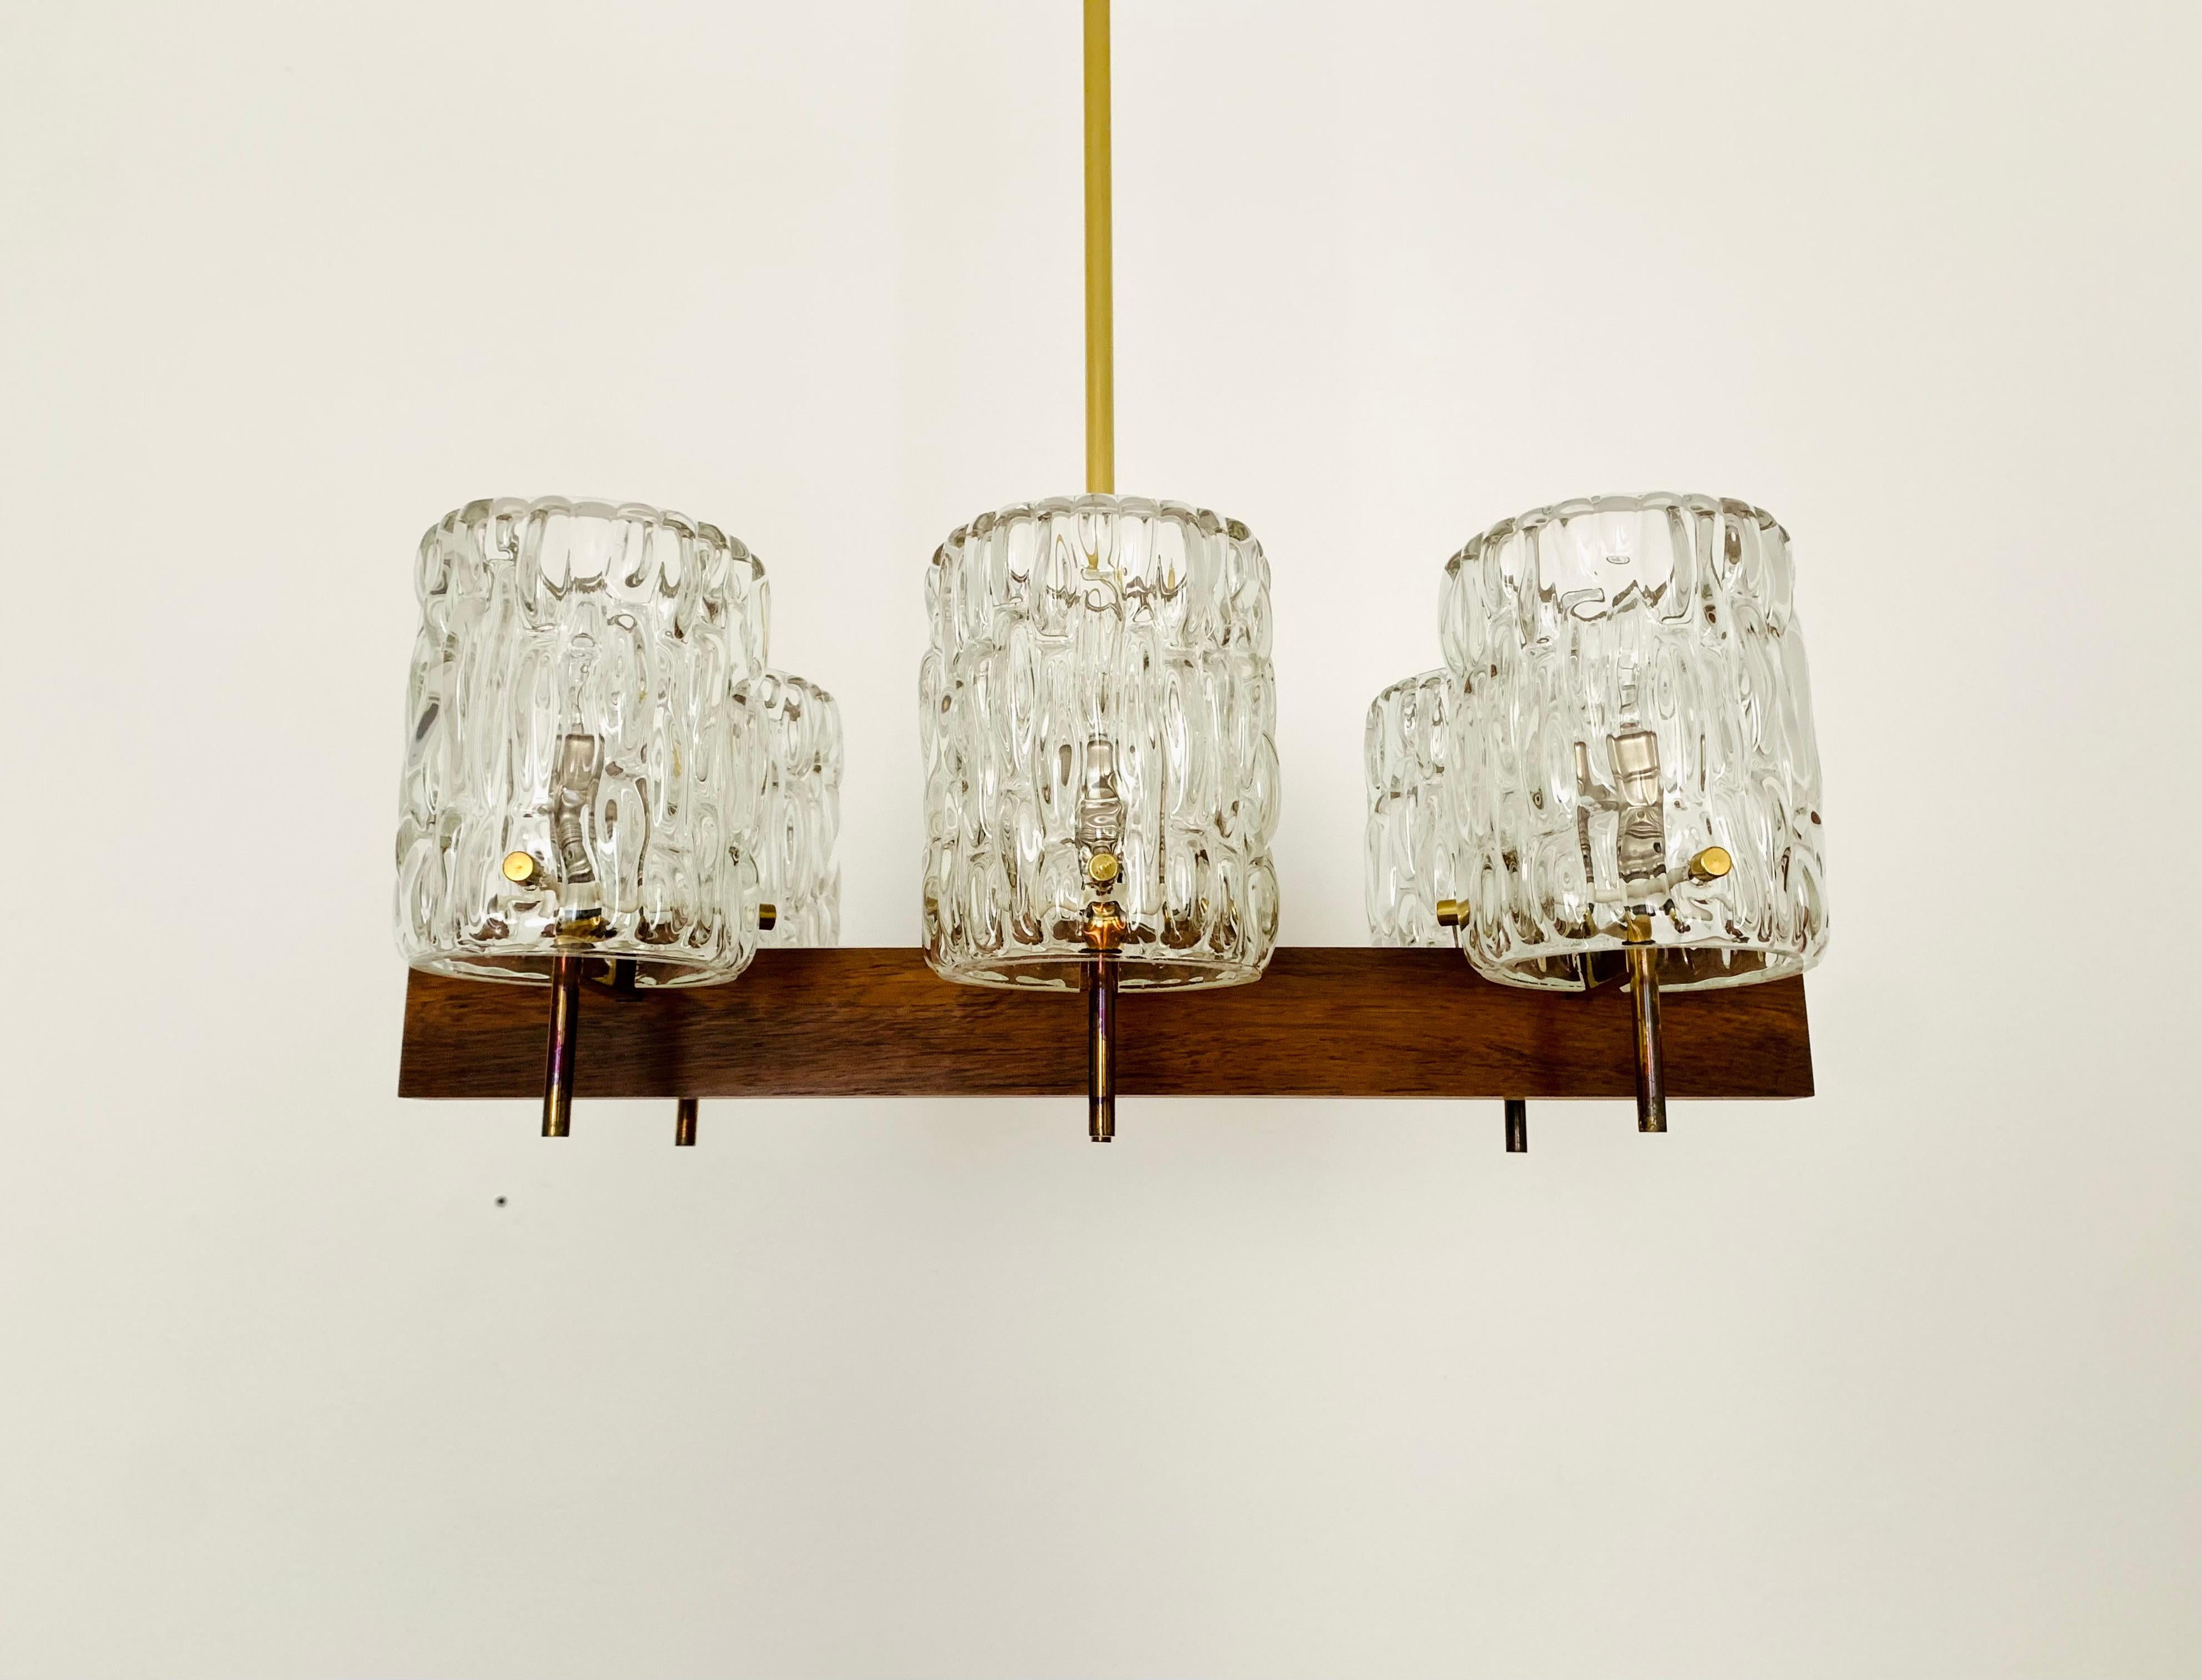 Breathtakingly beautiful crystal glass chandelier from the 1950s.
Wonderful mouth-blown glass with a great structure.
The wood underlines the elegant appearance.
The design and the materials used create a great glittering light.
An enrichment for